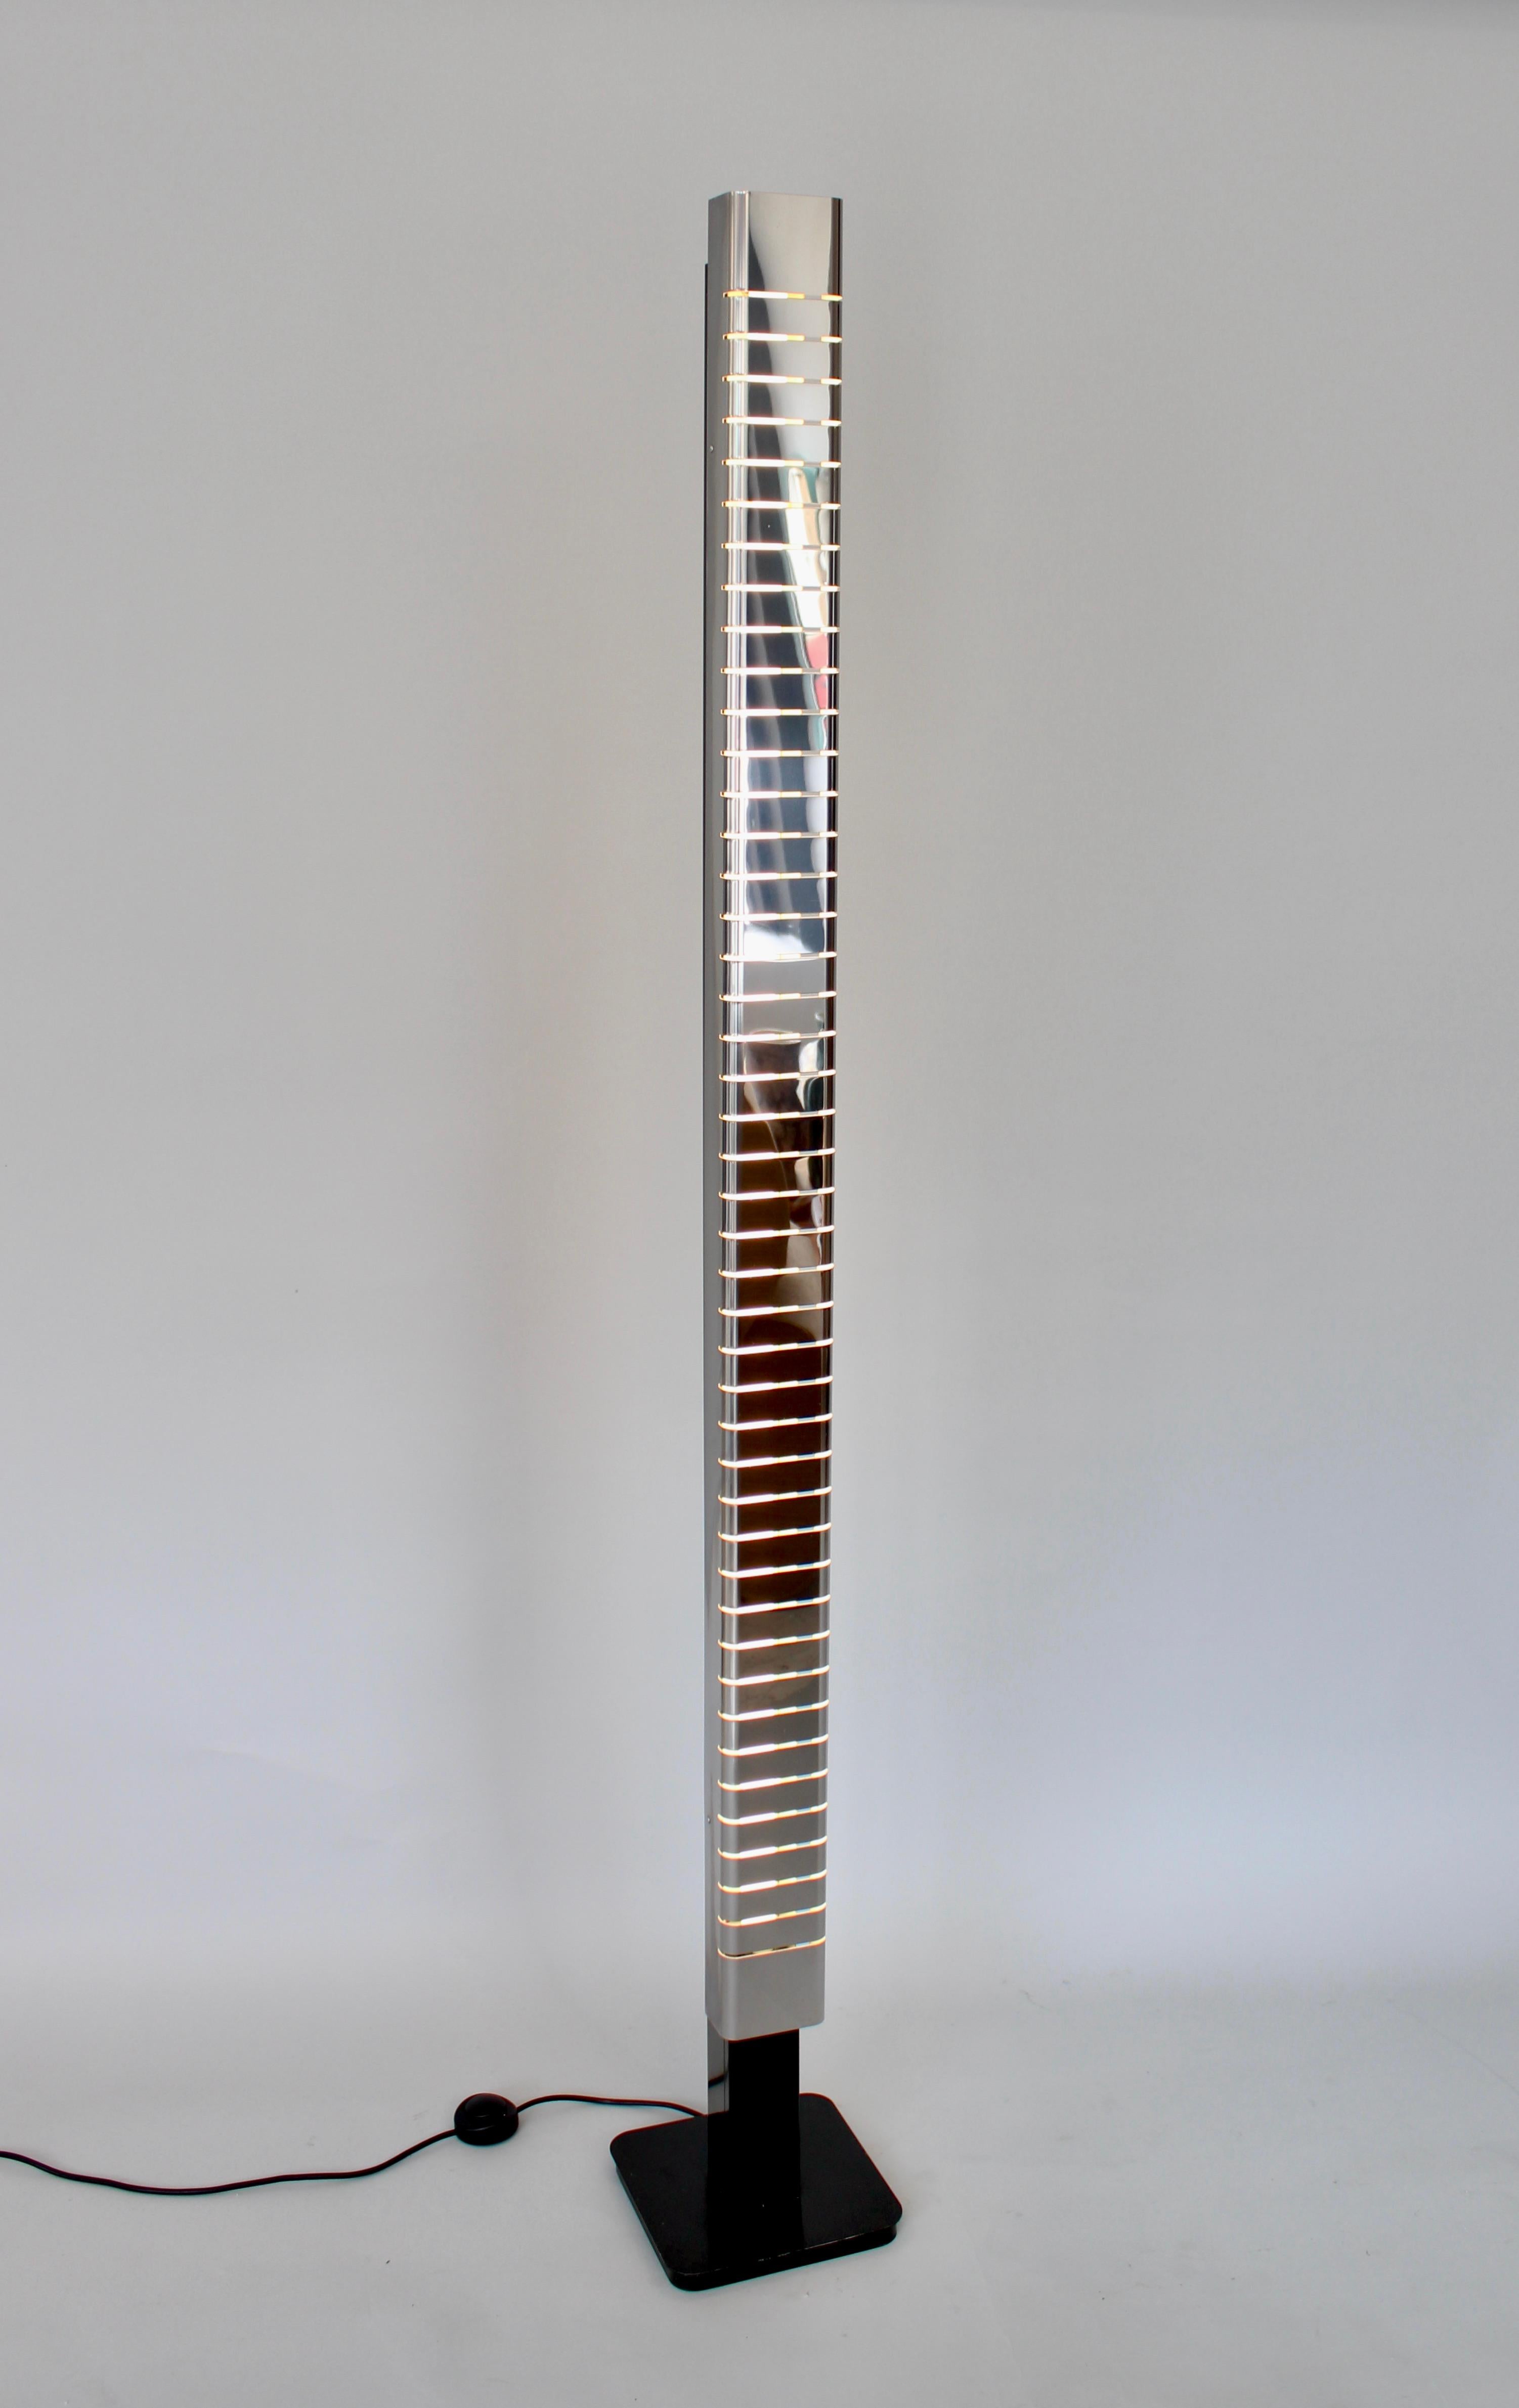 This column floor lamp was designed by Lamperti and manufactured in Italy circa 1970. In the manner of Serge Mouille. 
Polished nickel chromed steel diffuser floating over an enameled steel structure holding the light source. Amazing sculptural lamp